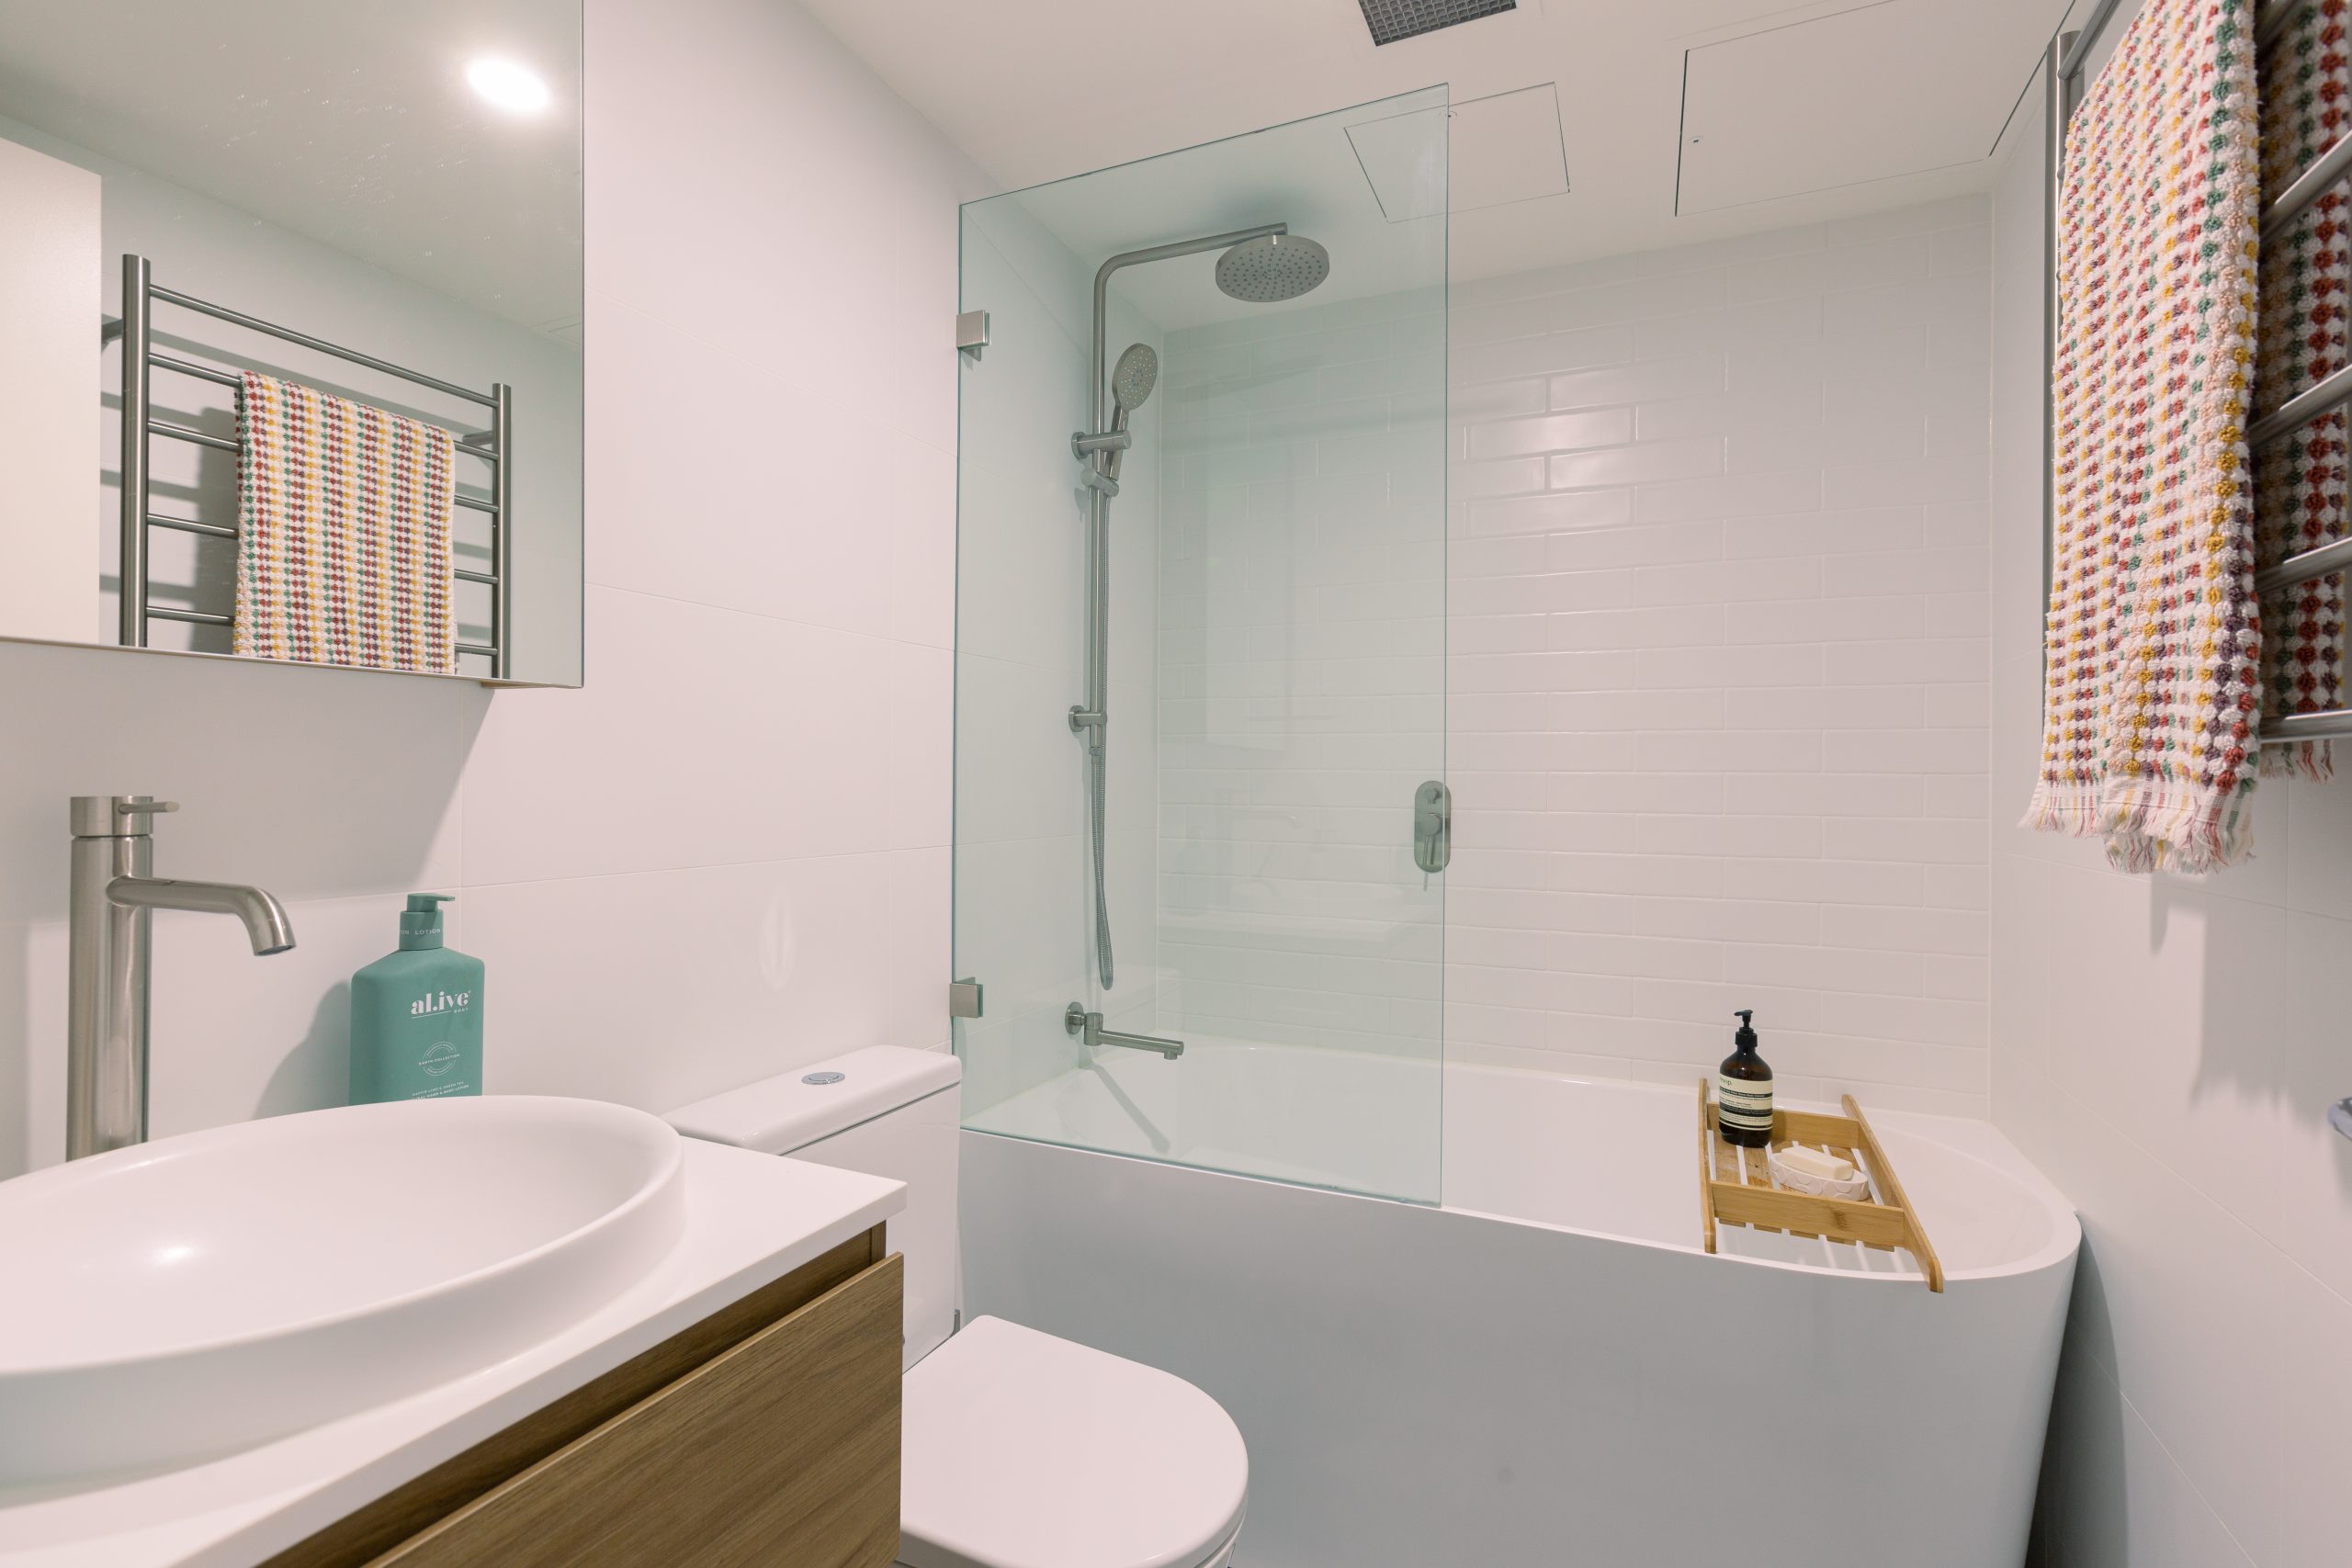 Tips for Choosing the Right Tapware and Basin’s for Your Bathroom Renovation